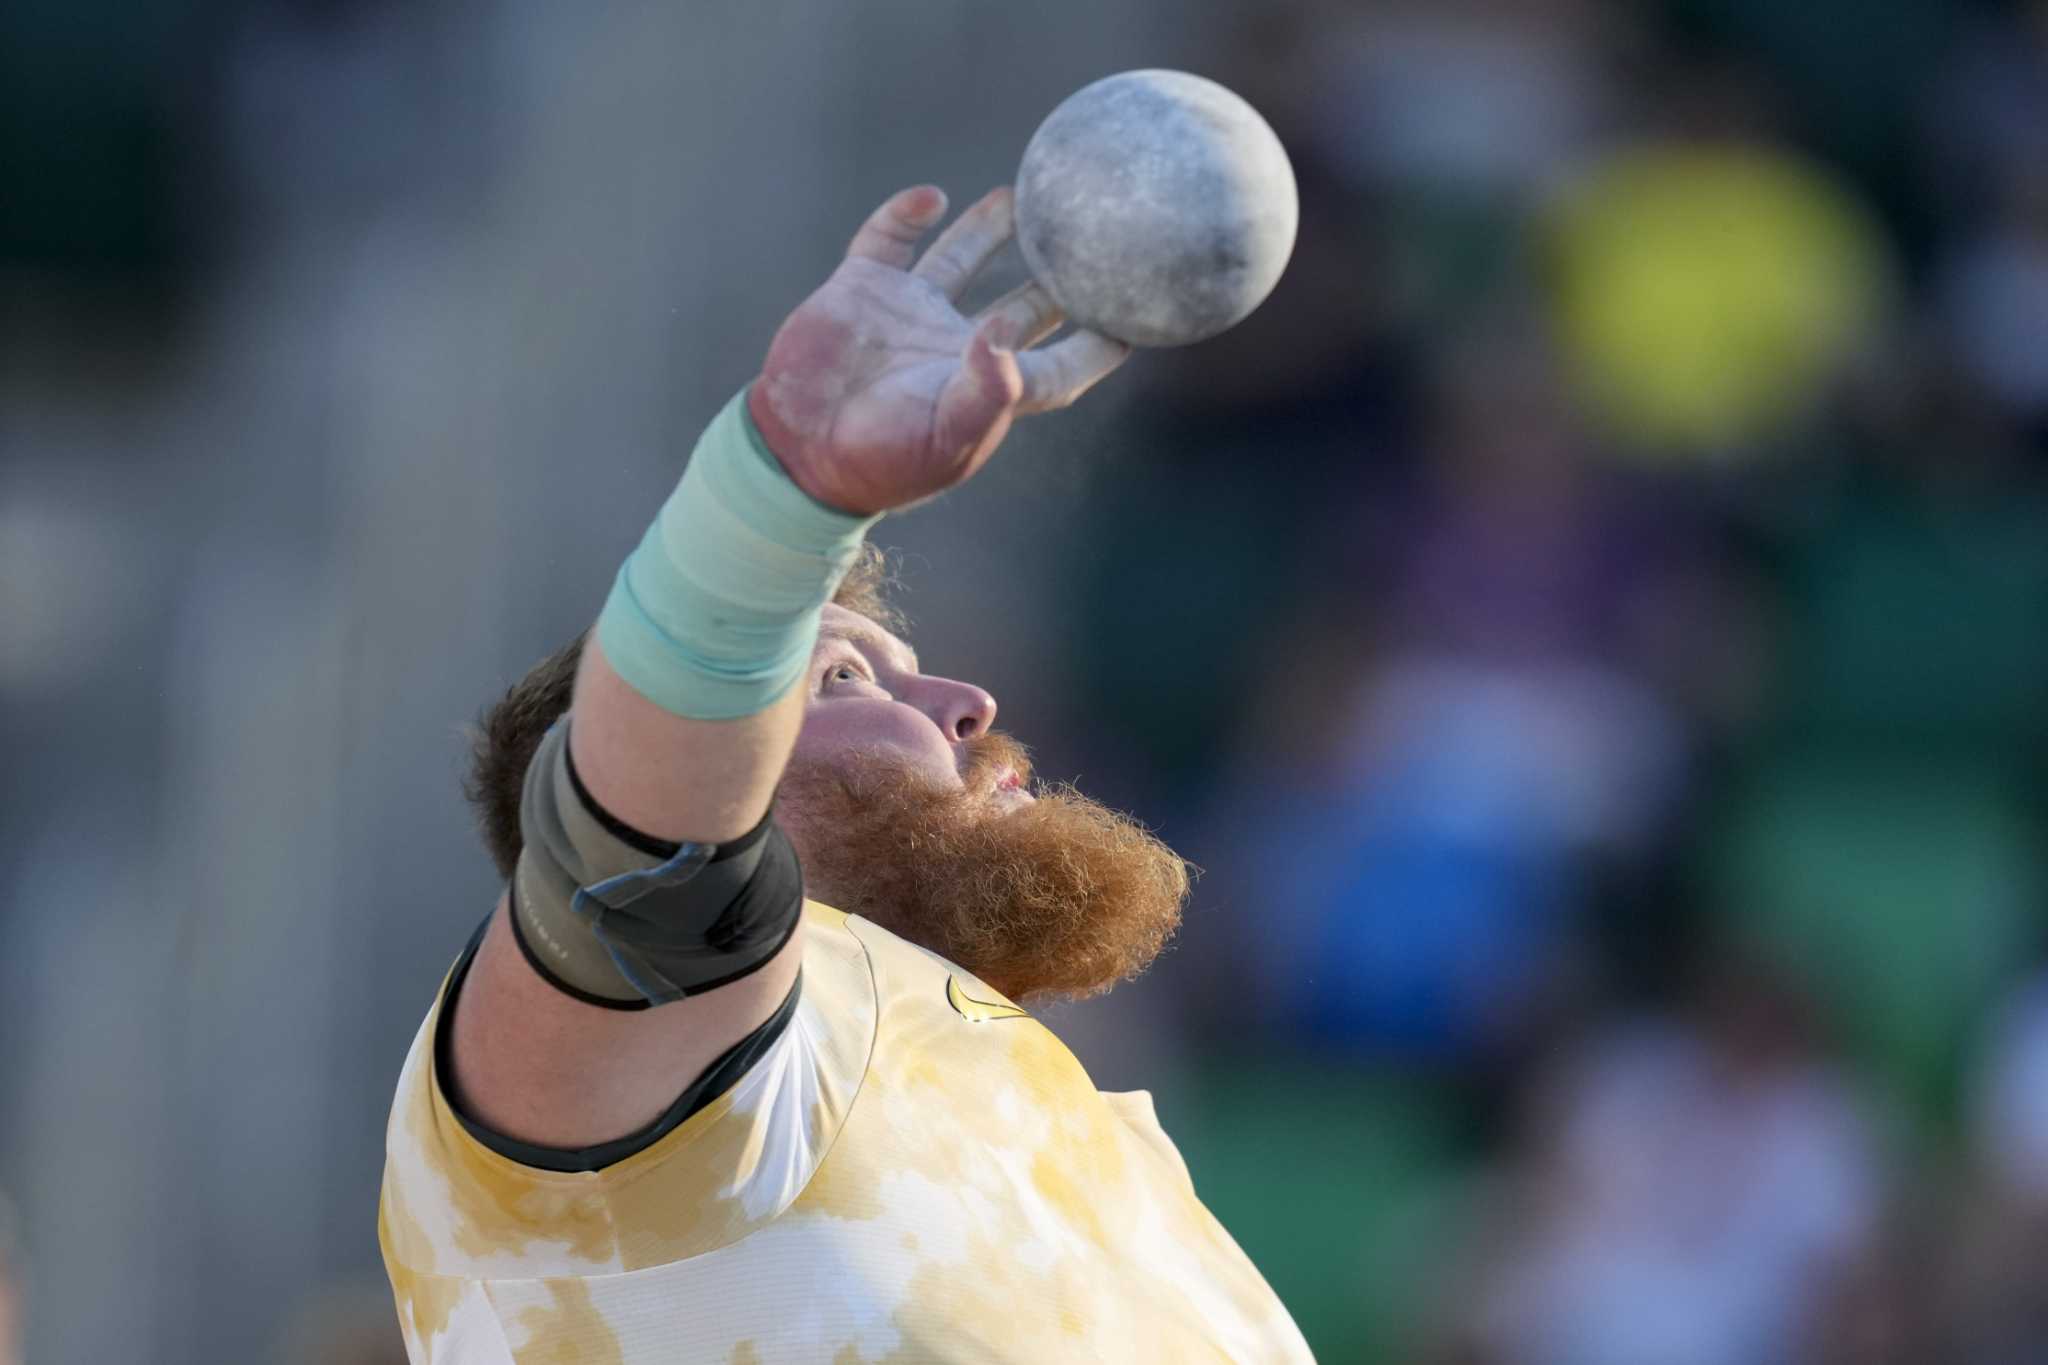 Ryan Crouser ready to chase 3rd straight Olympic shot put crown with aching elbow on the mend